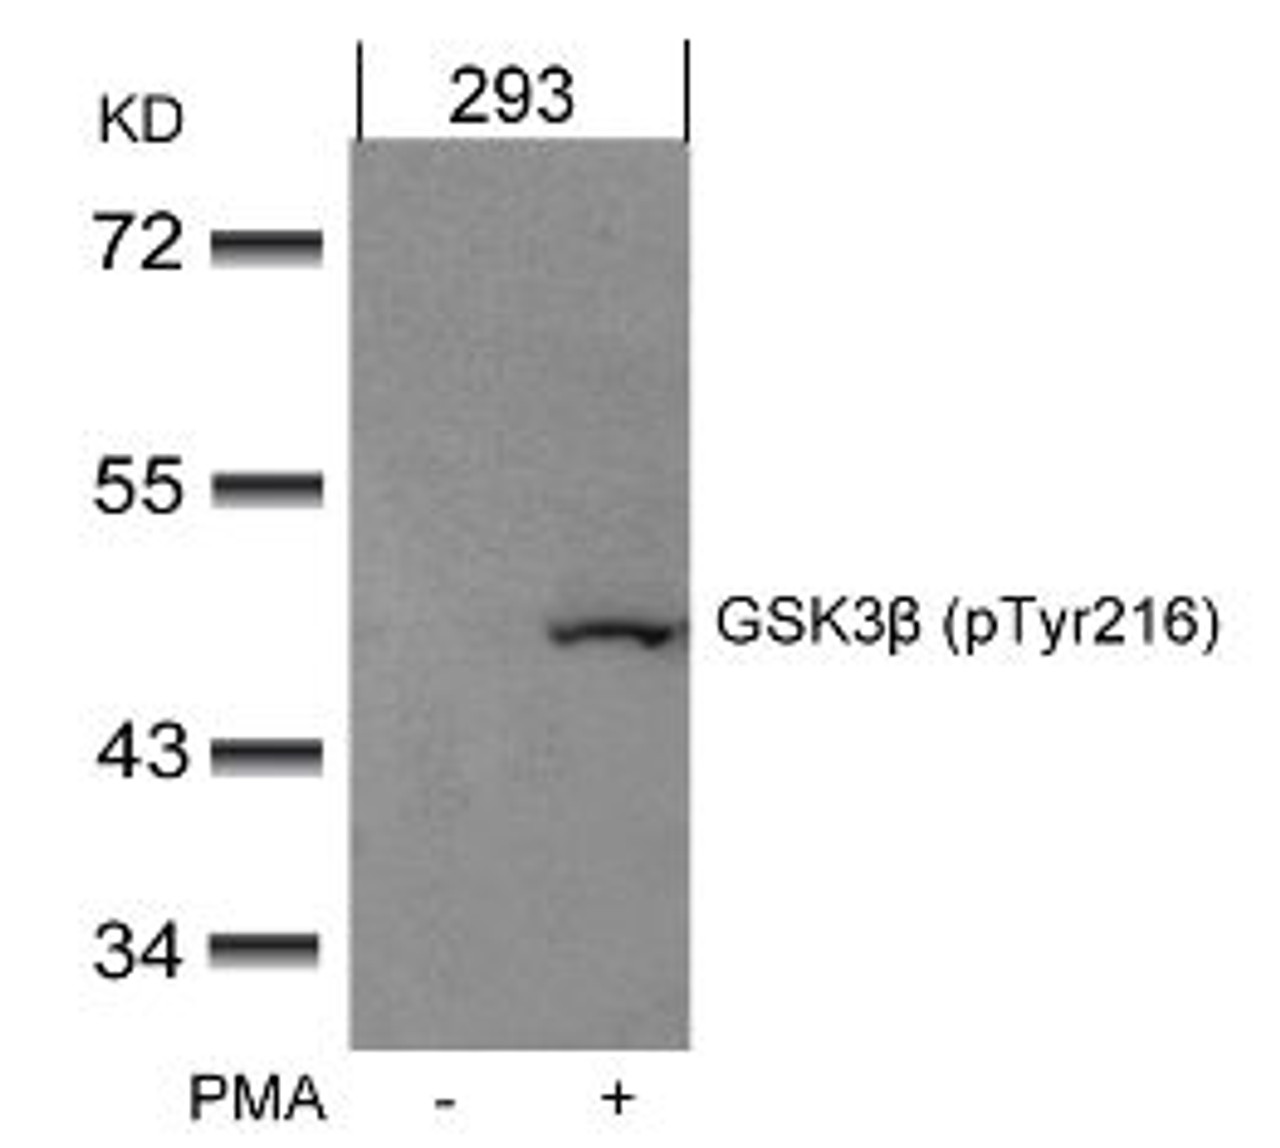 Western blot analysis of lysed extracts from 293 cells untreated or treated with PMA using GSK3&#946; (Phospho-Tyr216) .